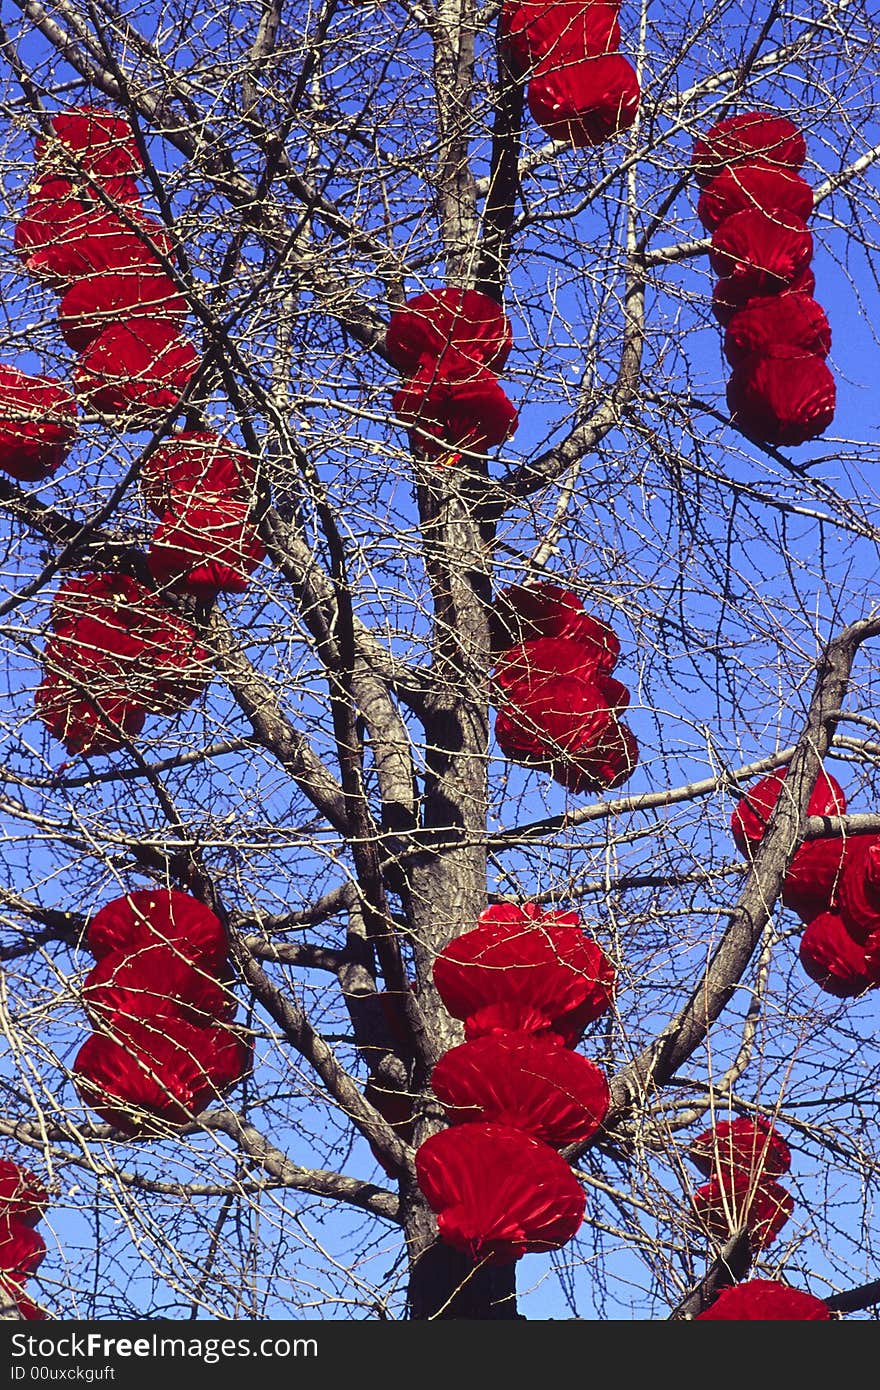 Red lanterns in the carnival, aims of shooting game